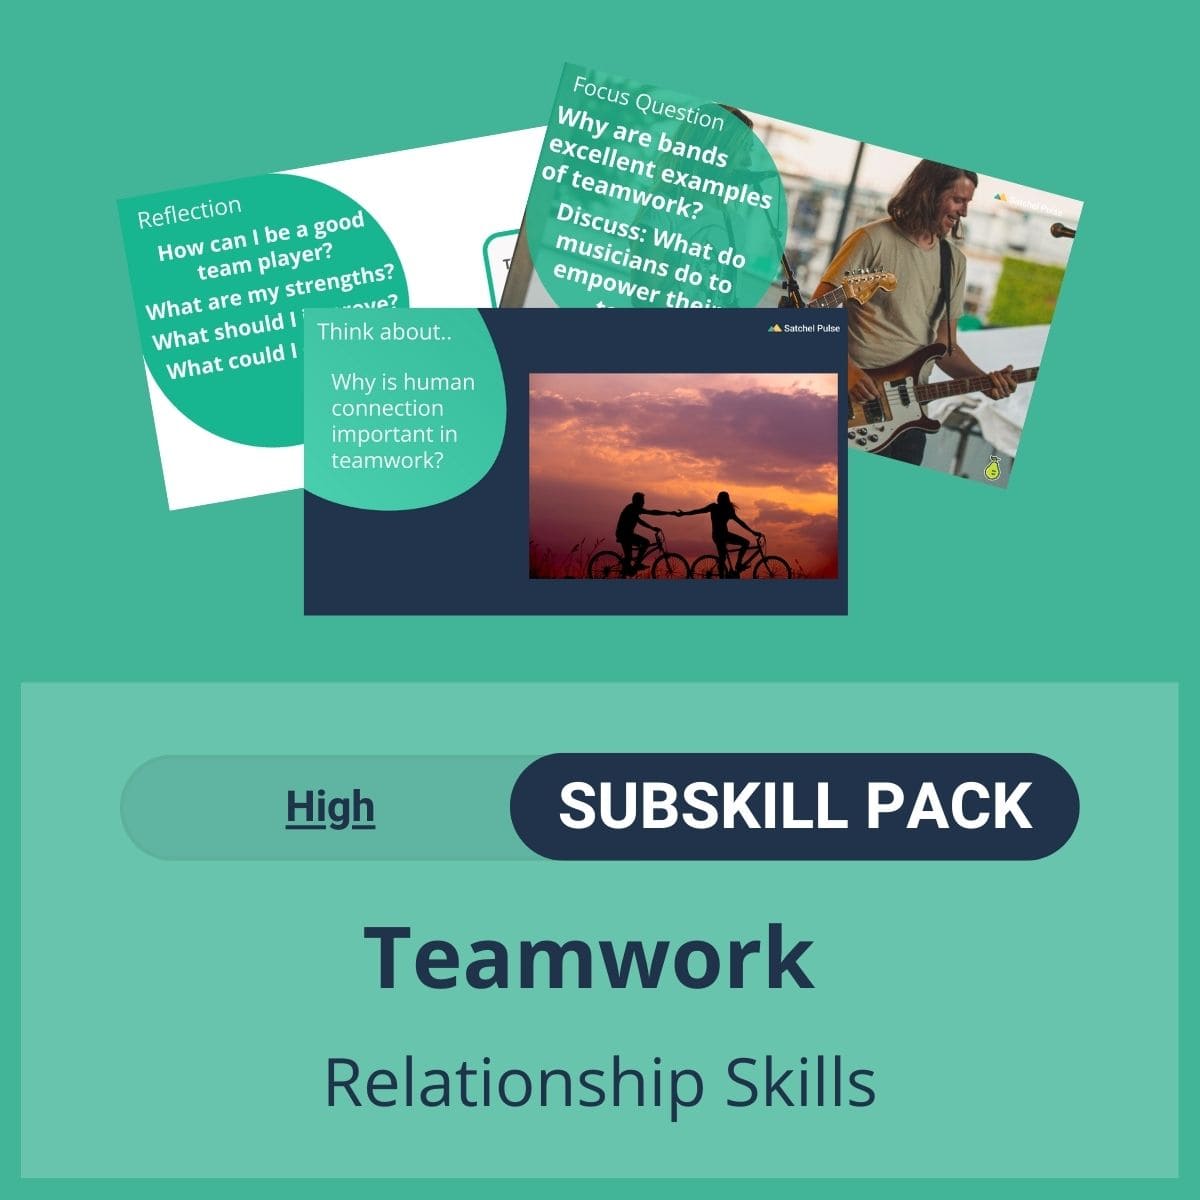 SEL Resource pack with social-emotional learning lessons and self-studies to help you teach Teamwork in your classroom as a part of the SEL curriculum.